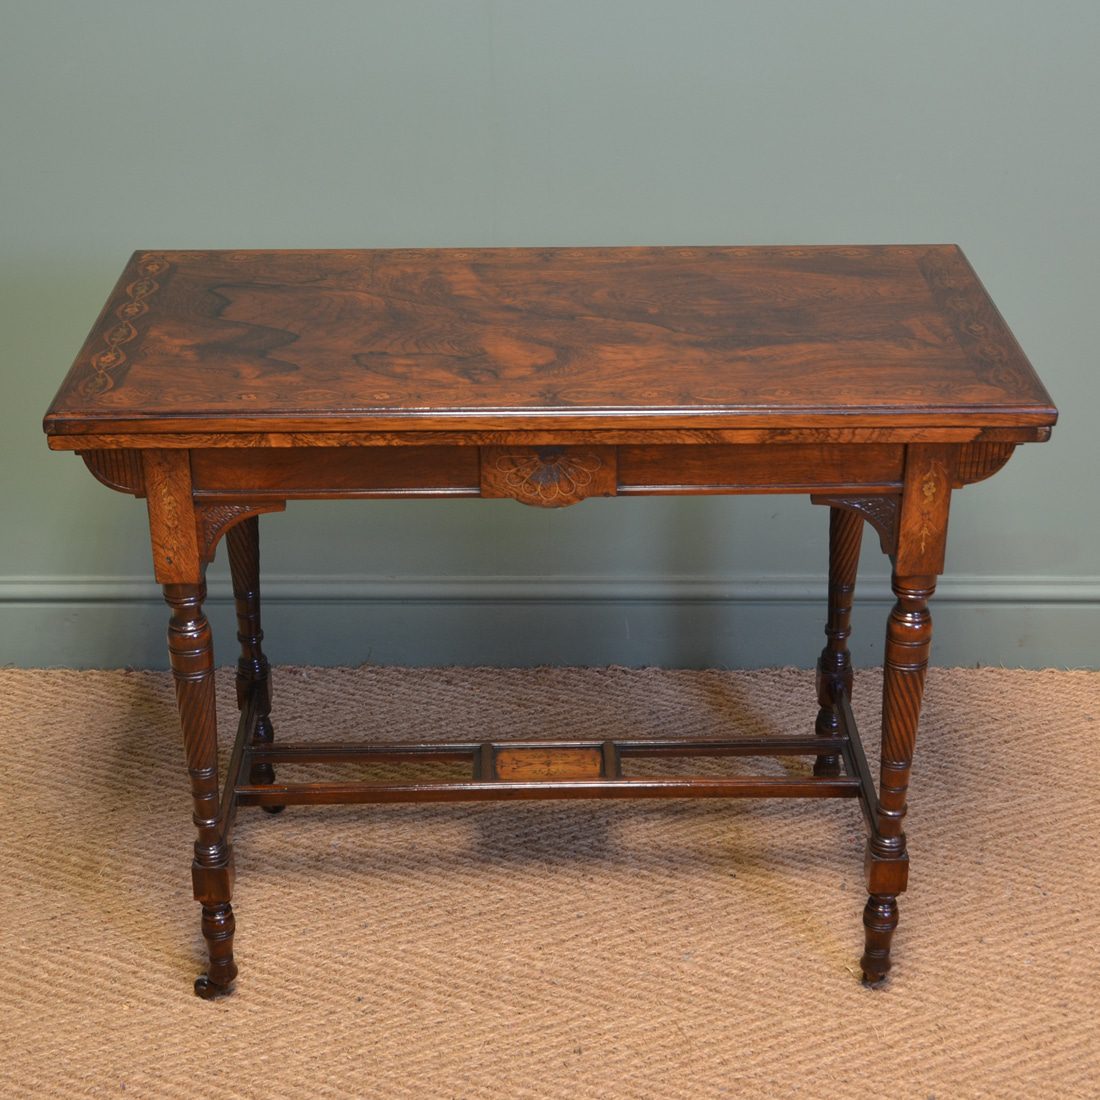 Striking Arts And Crafts Victorian Figured Rosewood Inlaid Side / Games Table By JAS Shoolbred.